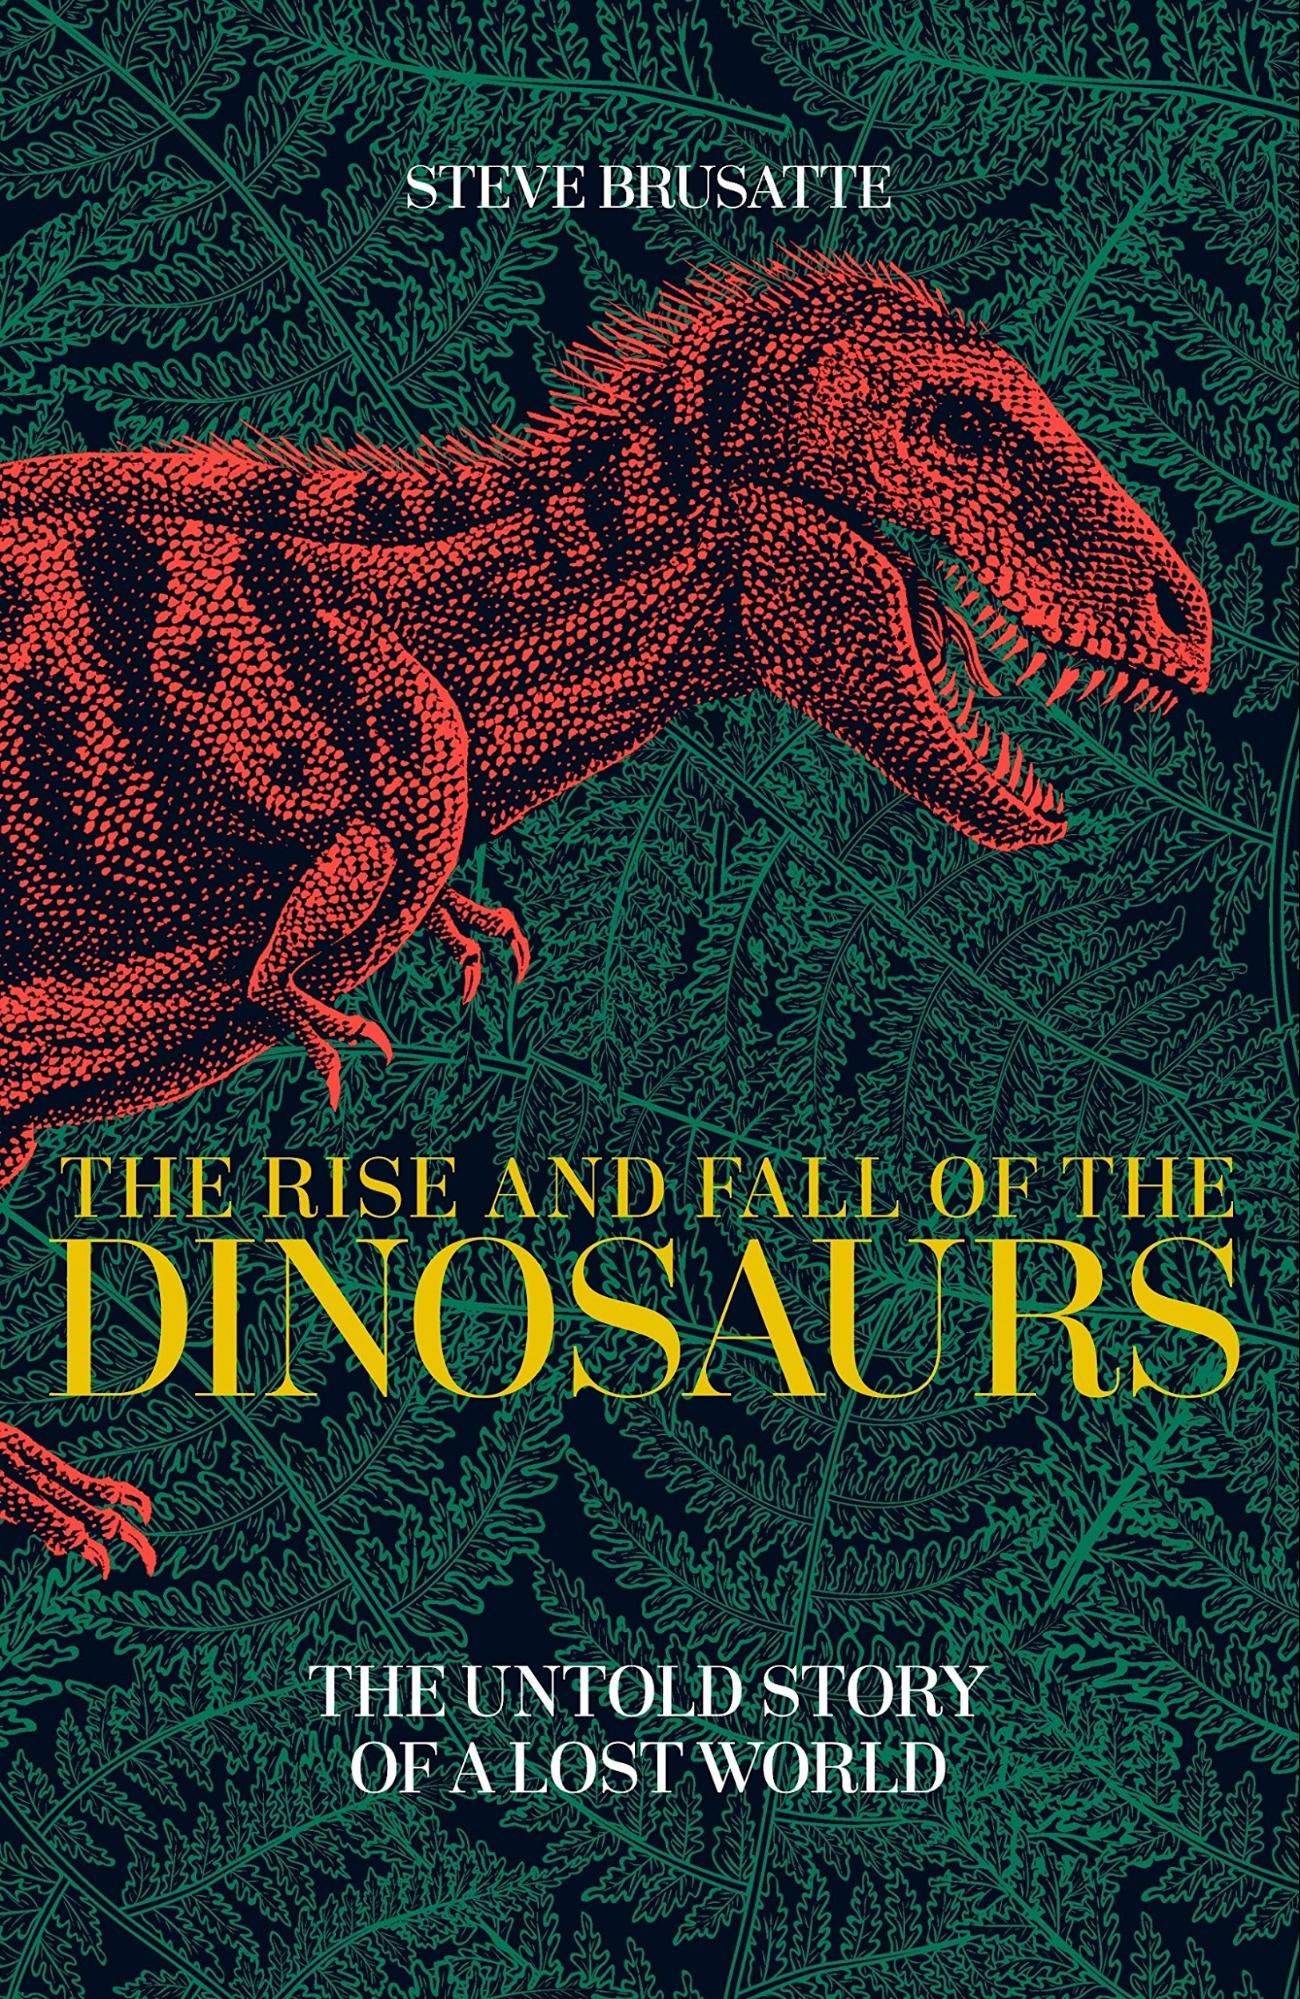 The Rise and Fall of the Dinosaurs – Steve Brusatte